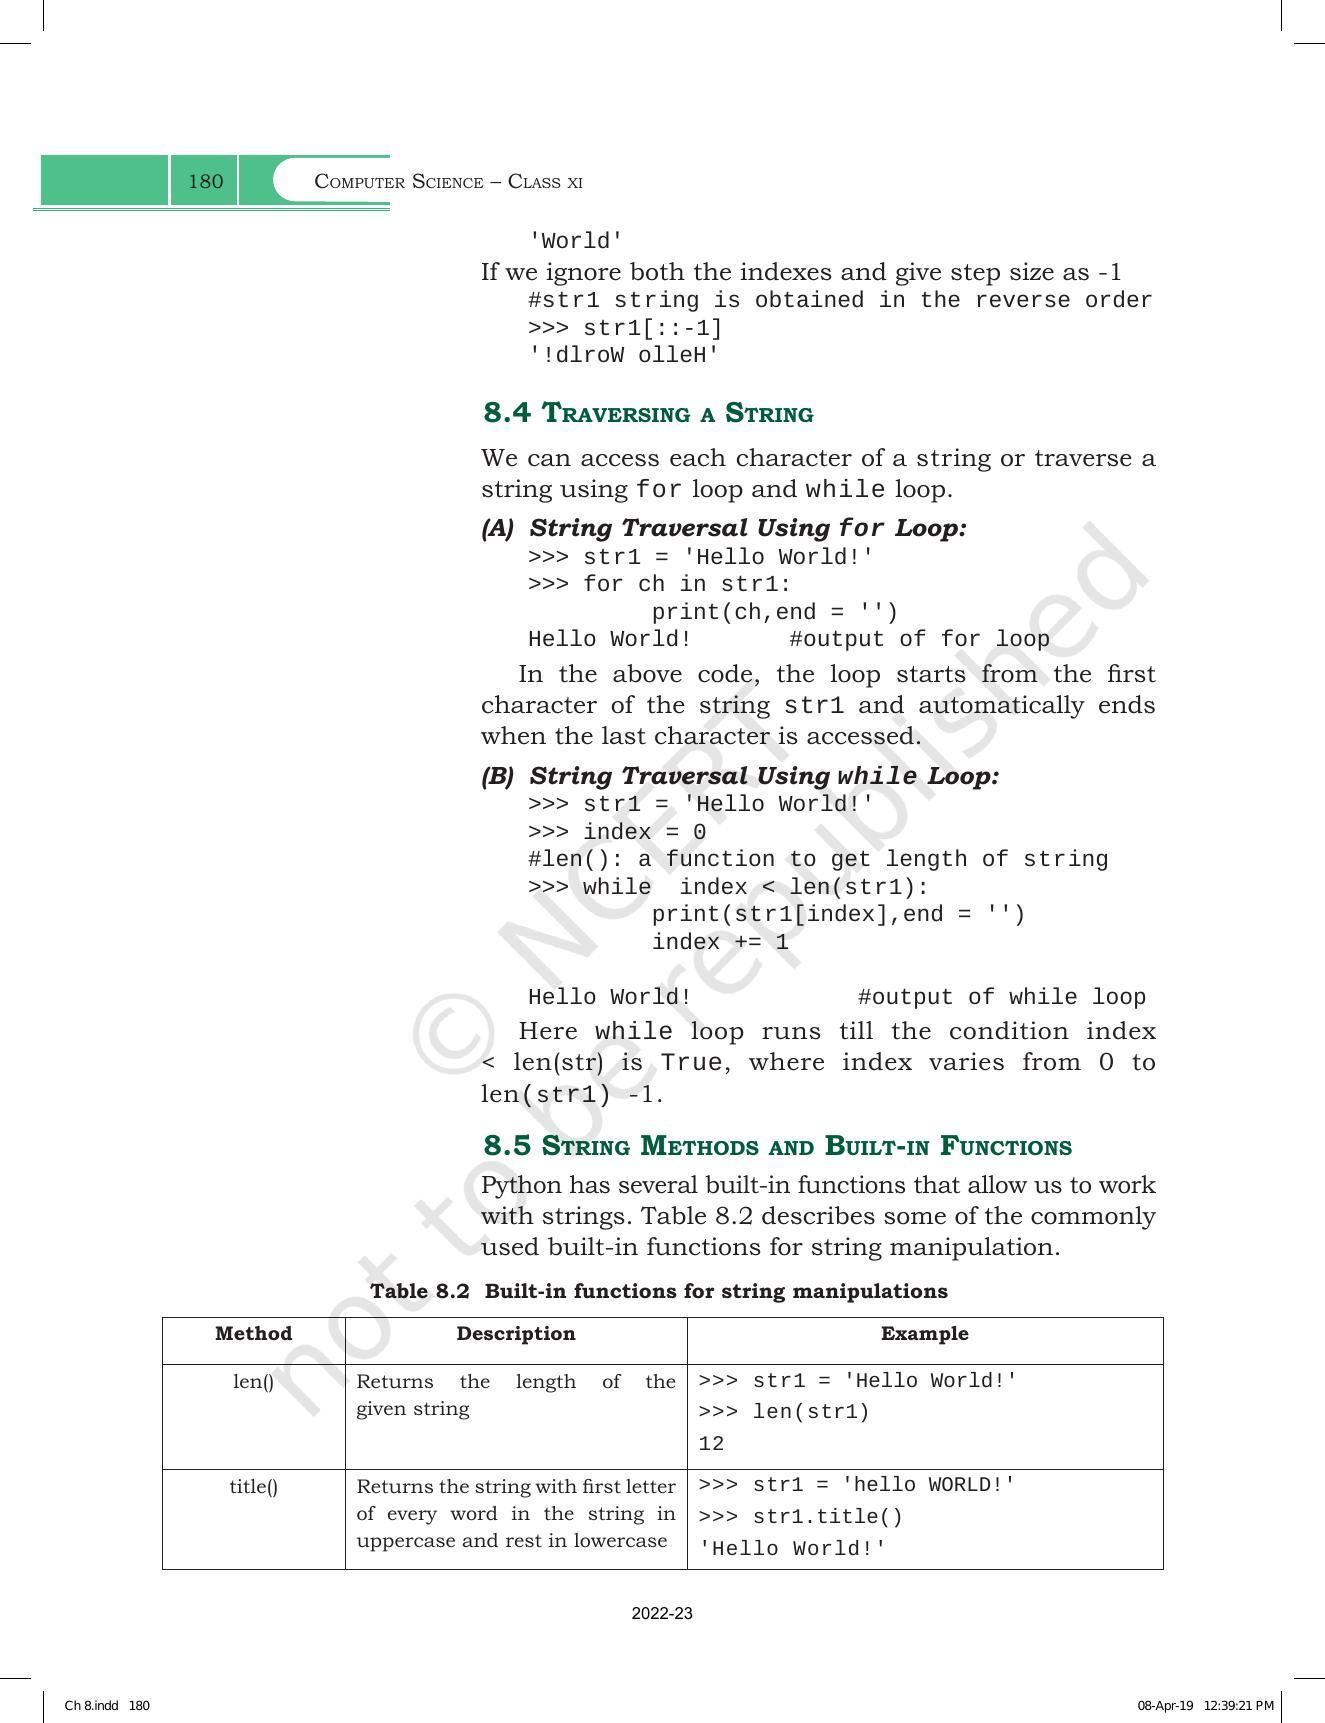 NCERT Book for Class 11 Computer Science Chapter 8 Strings - Page 6